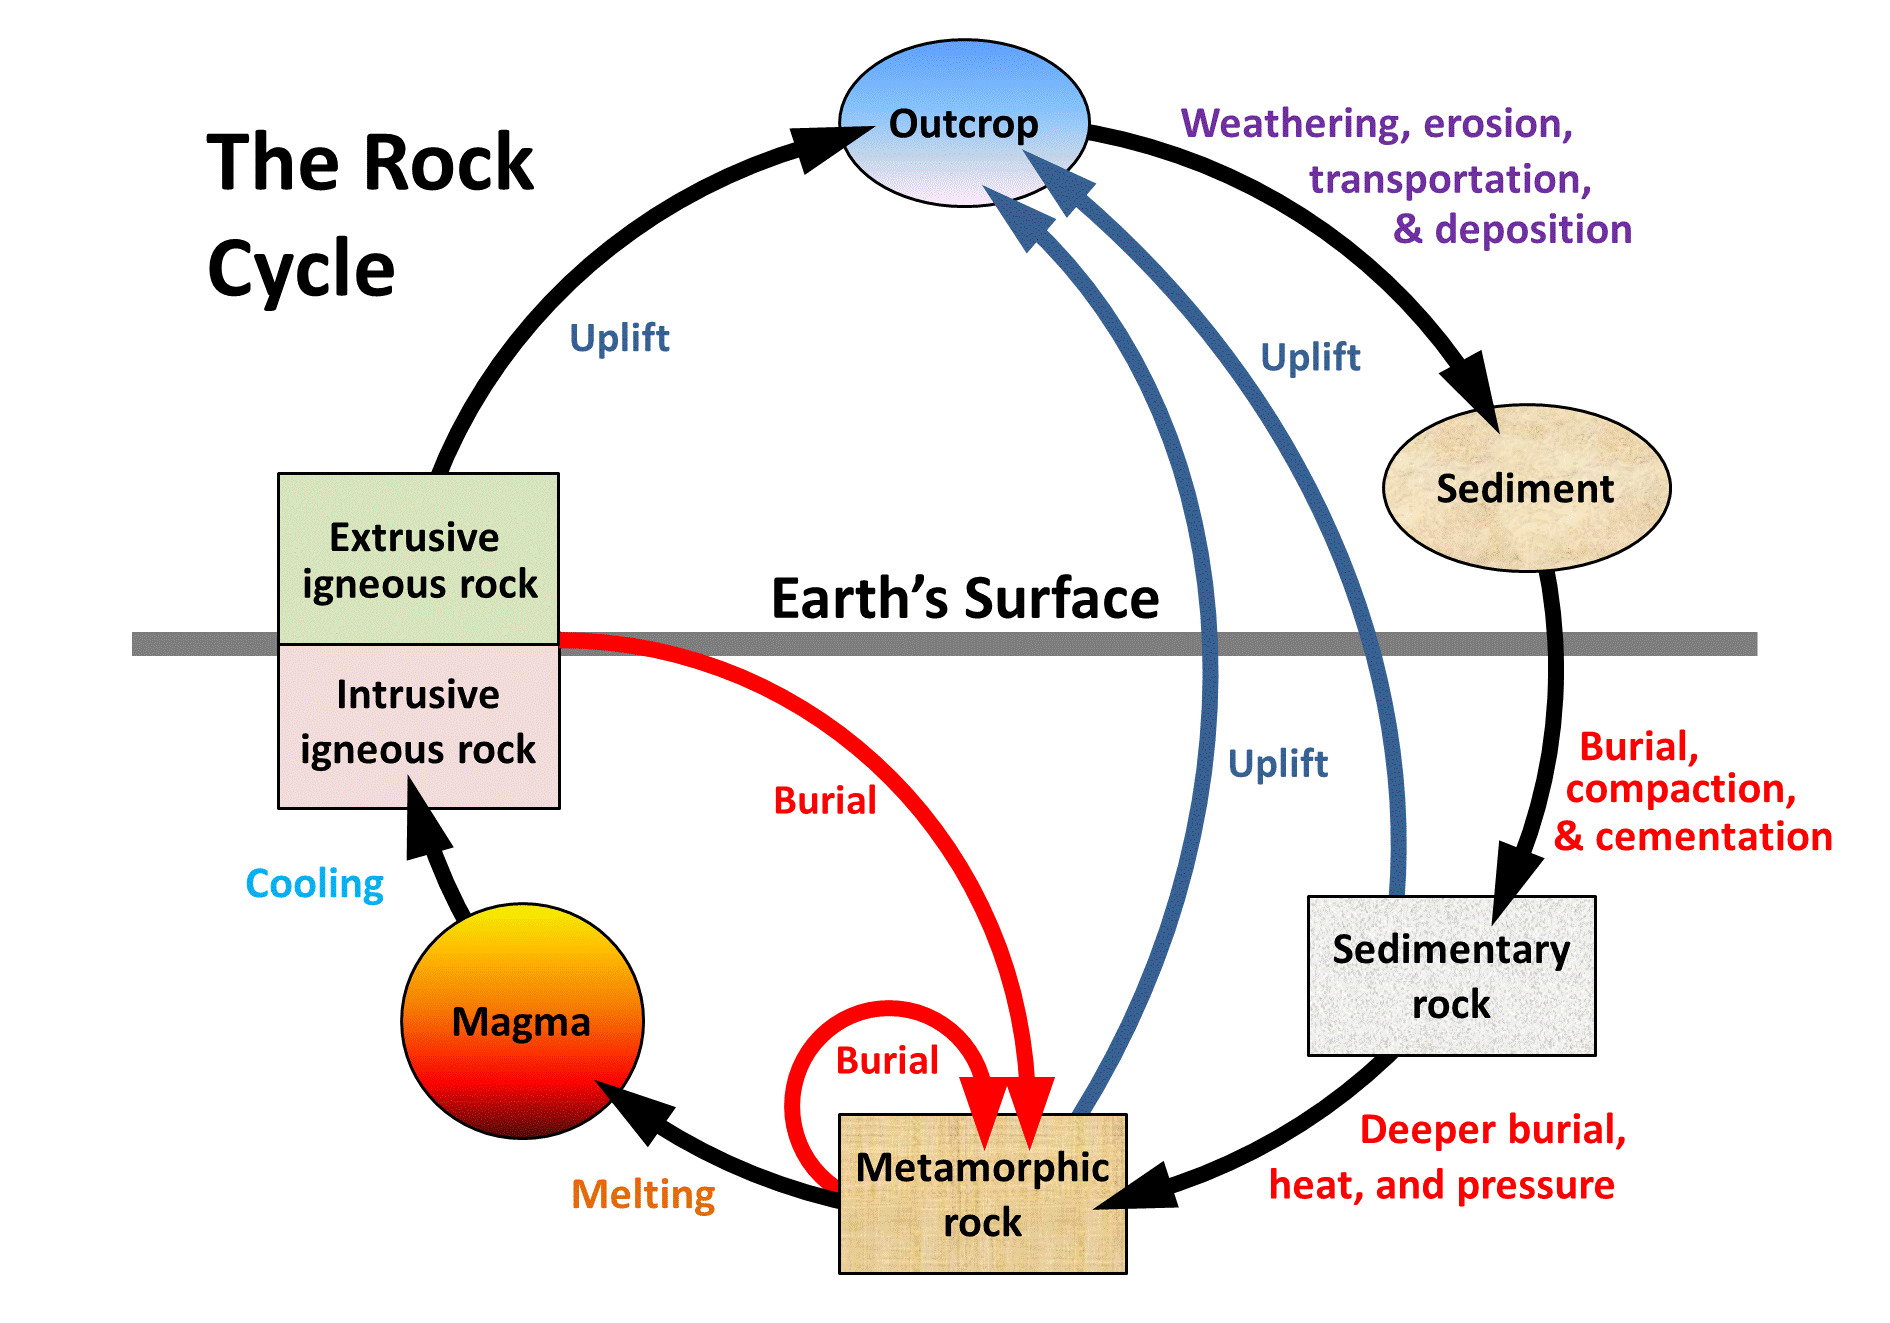 The rock cycle. Image description available